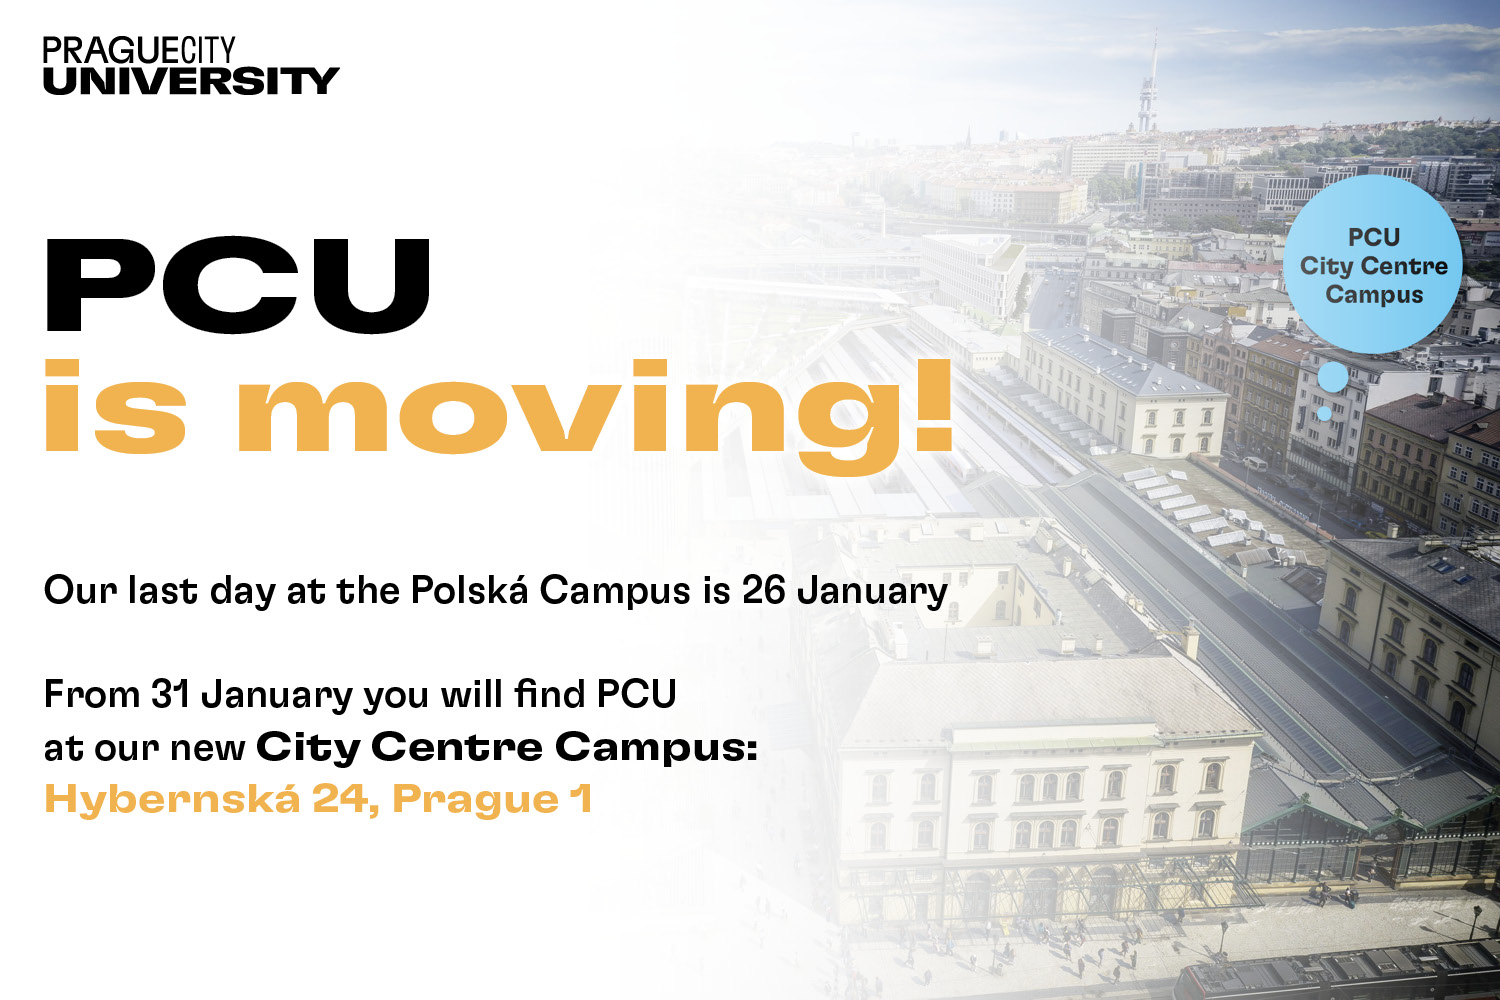 pcu-is-moving-1500x1000px-1